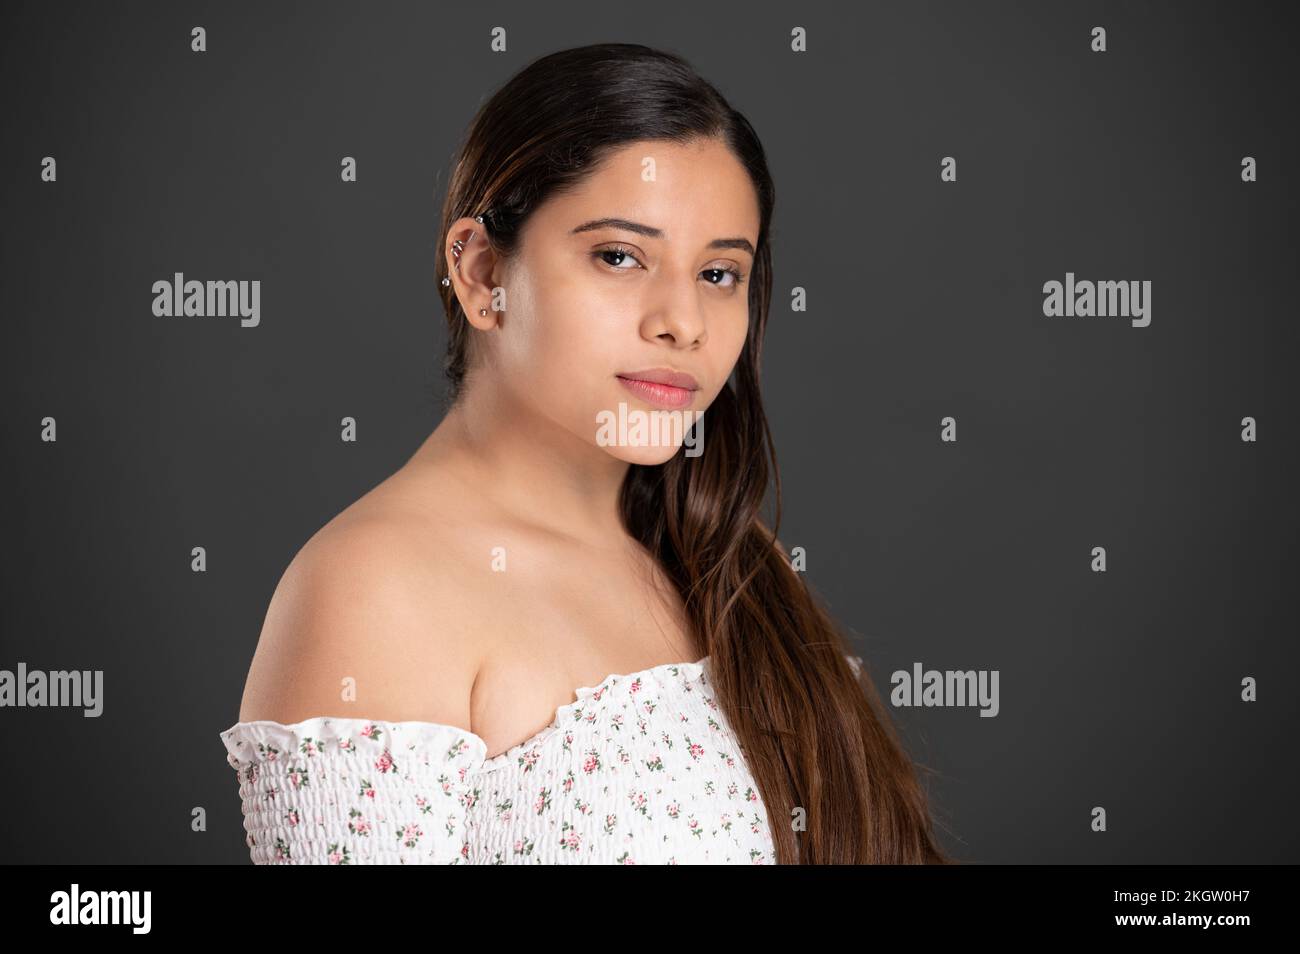 Portrait of latin girl with piercing in ear on dark studio background Stock Photo